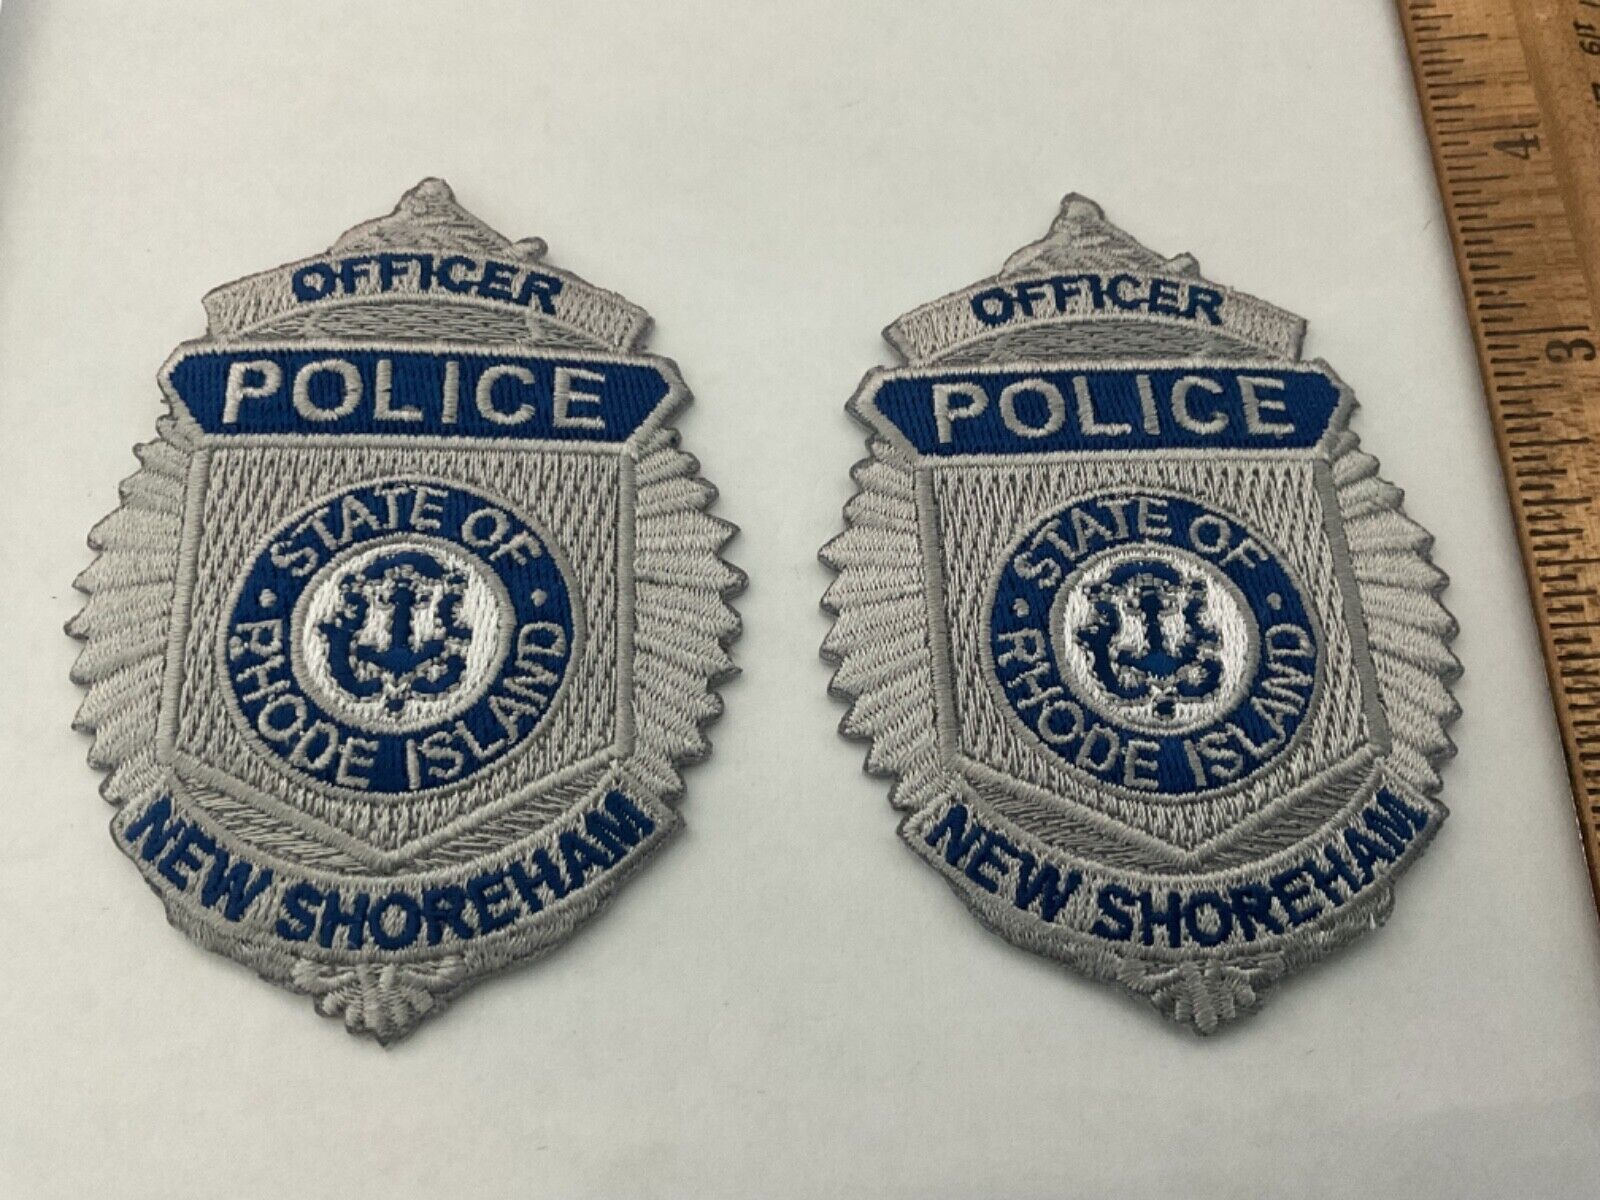 Police Officer New Shoreham State Of Rhode Island 2 piece collectible set new